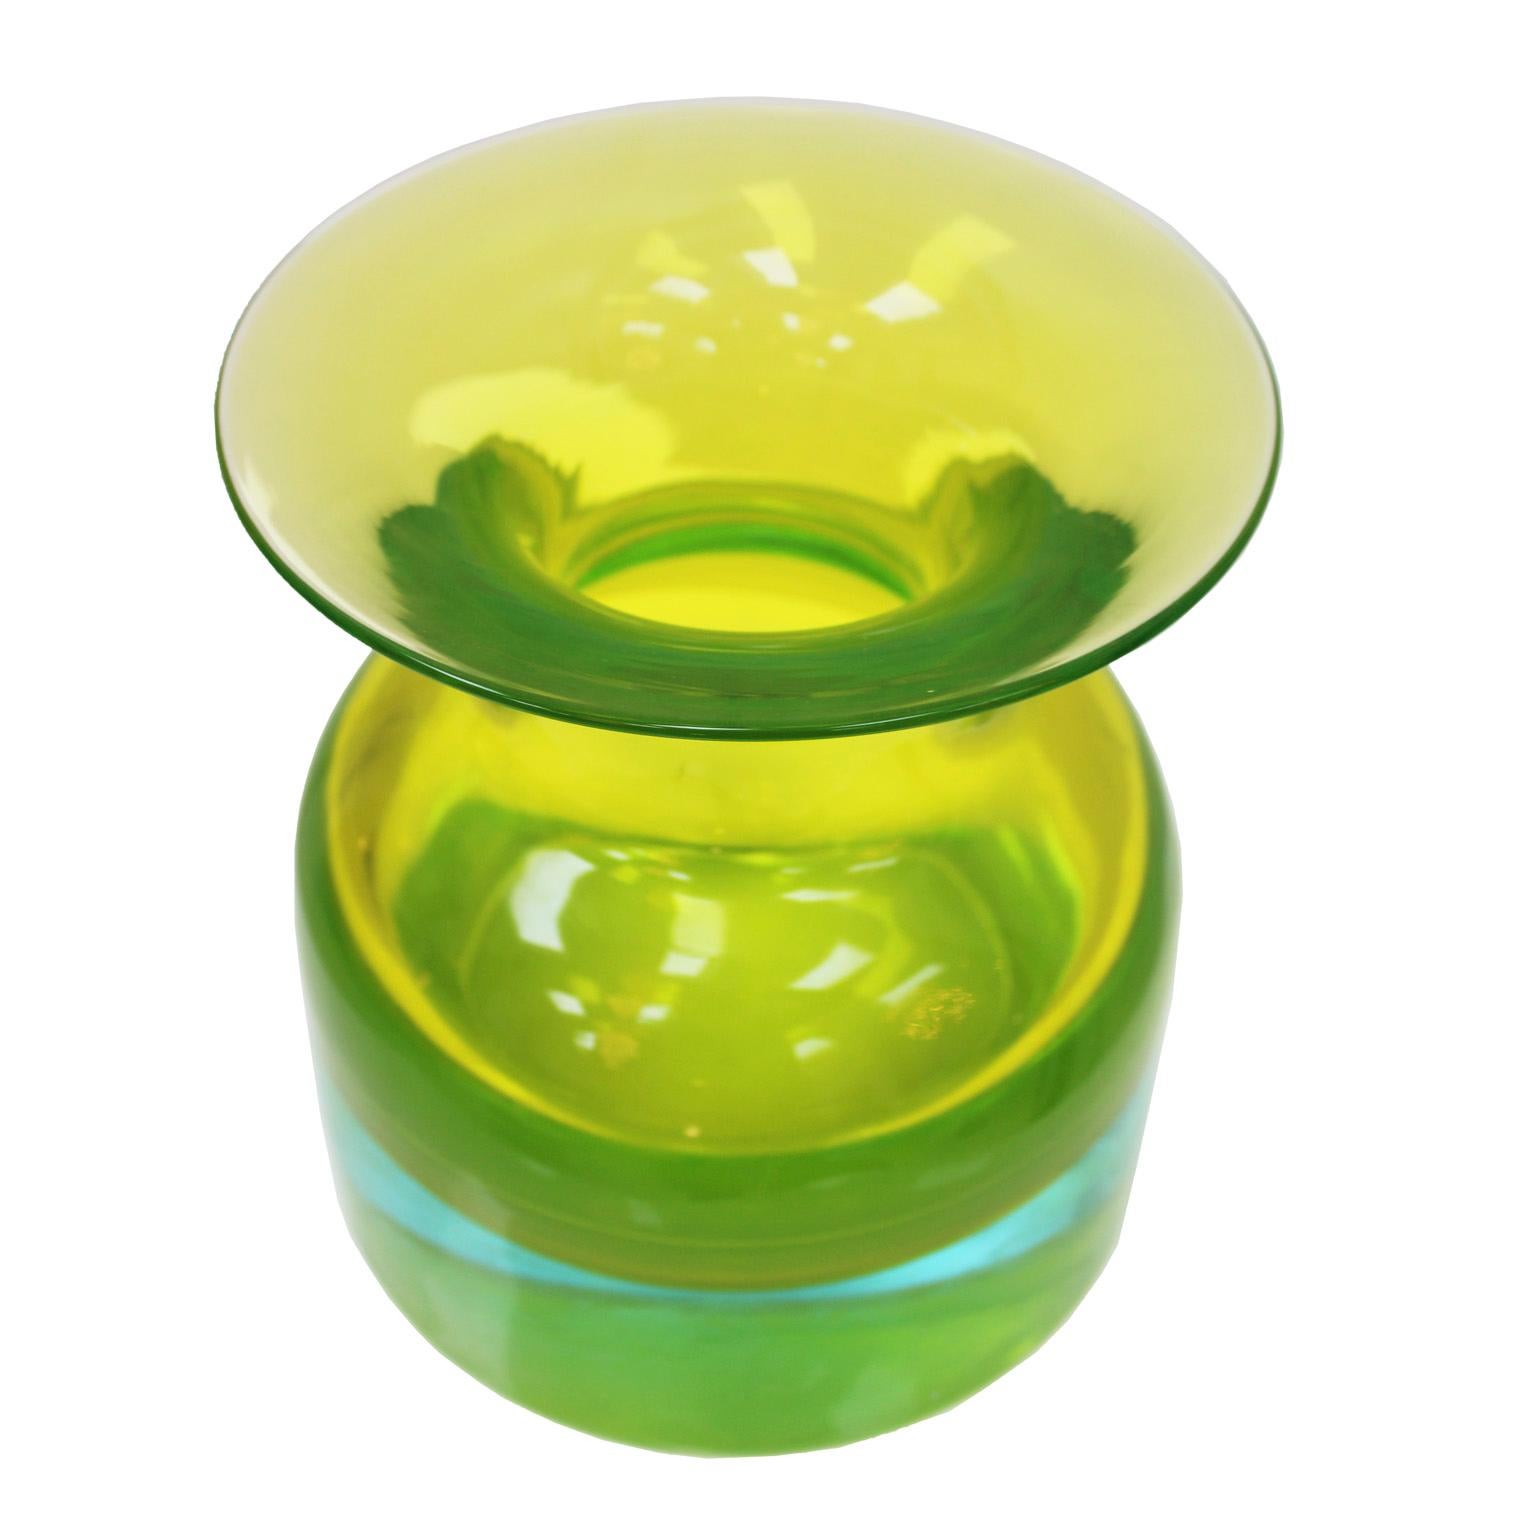 Italian MidCentury Turquoise Yellow Sommerso Murano Glass Vase by Flavio Poli 1950 For Sale